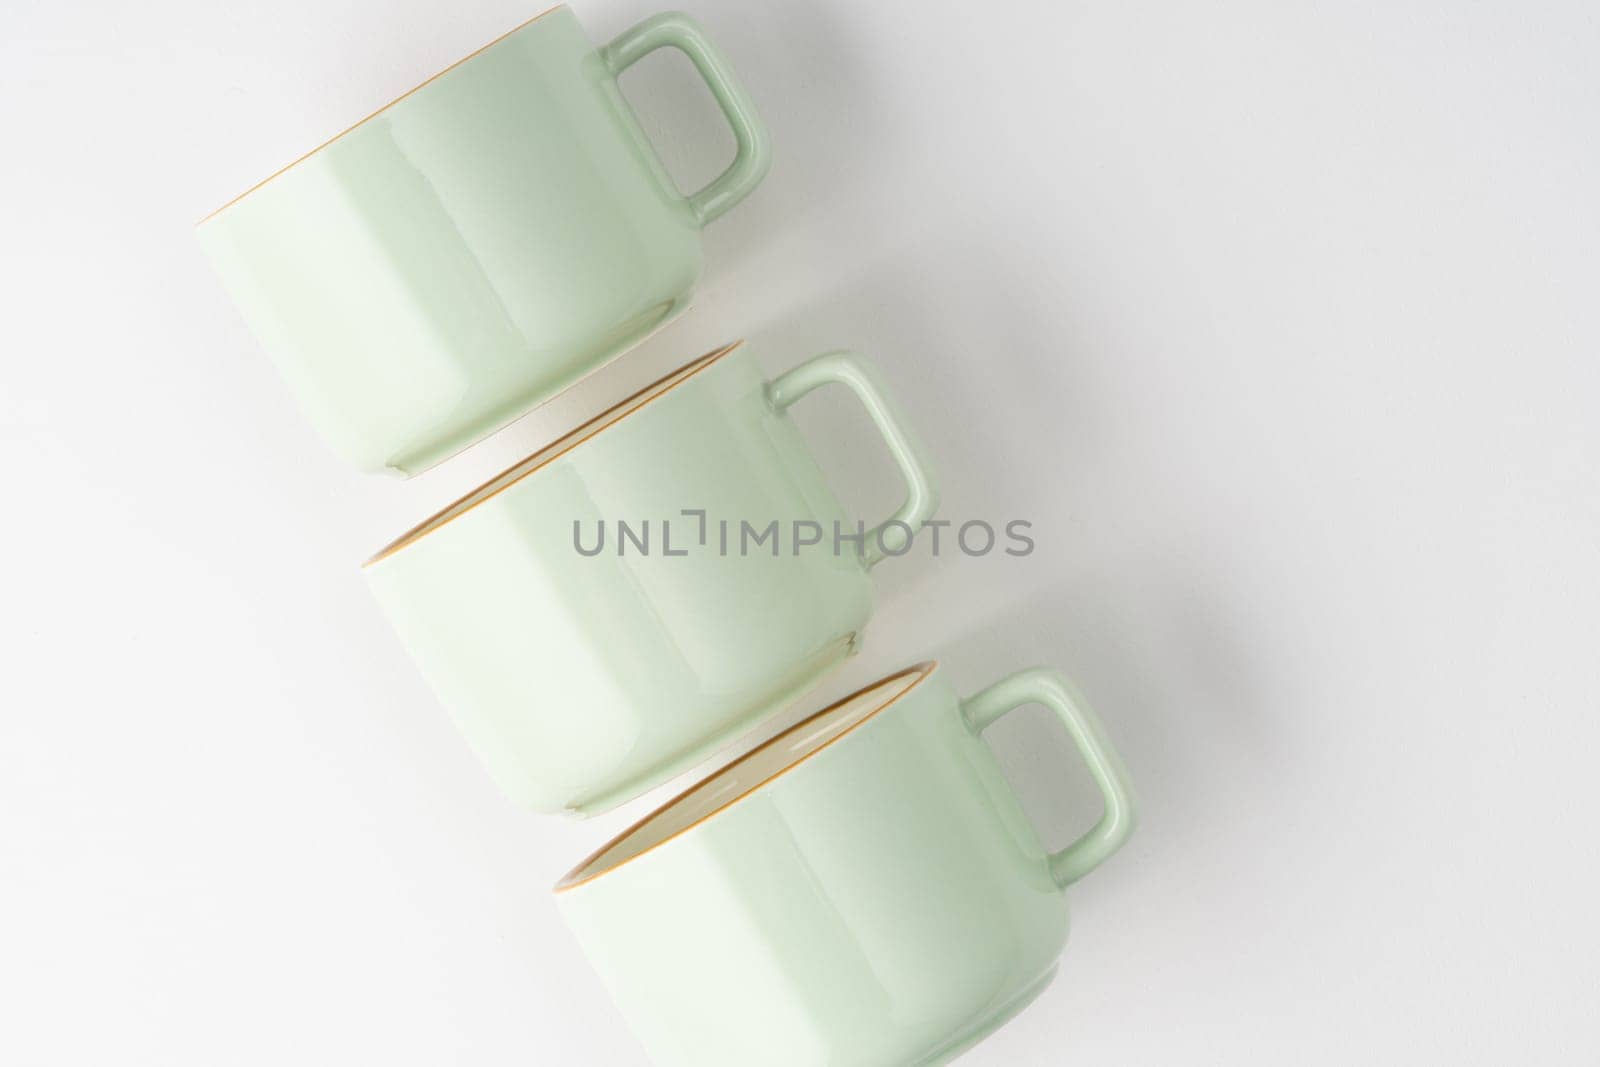 A set of white and pastel green ceramic teacups with orange outlines by A_Karim